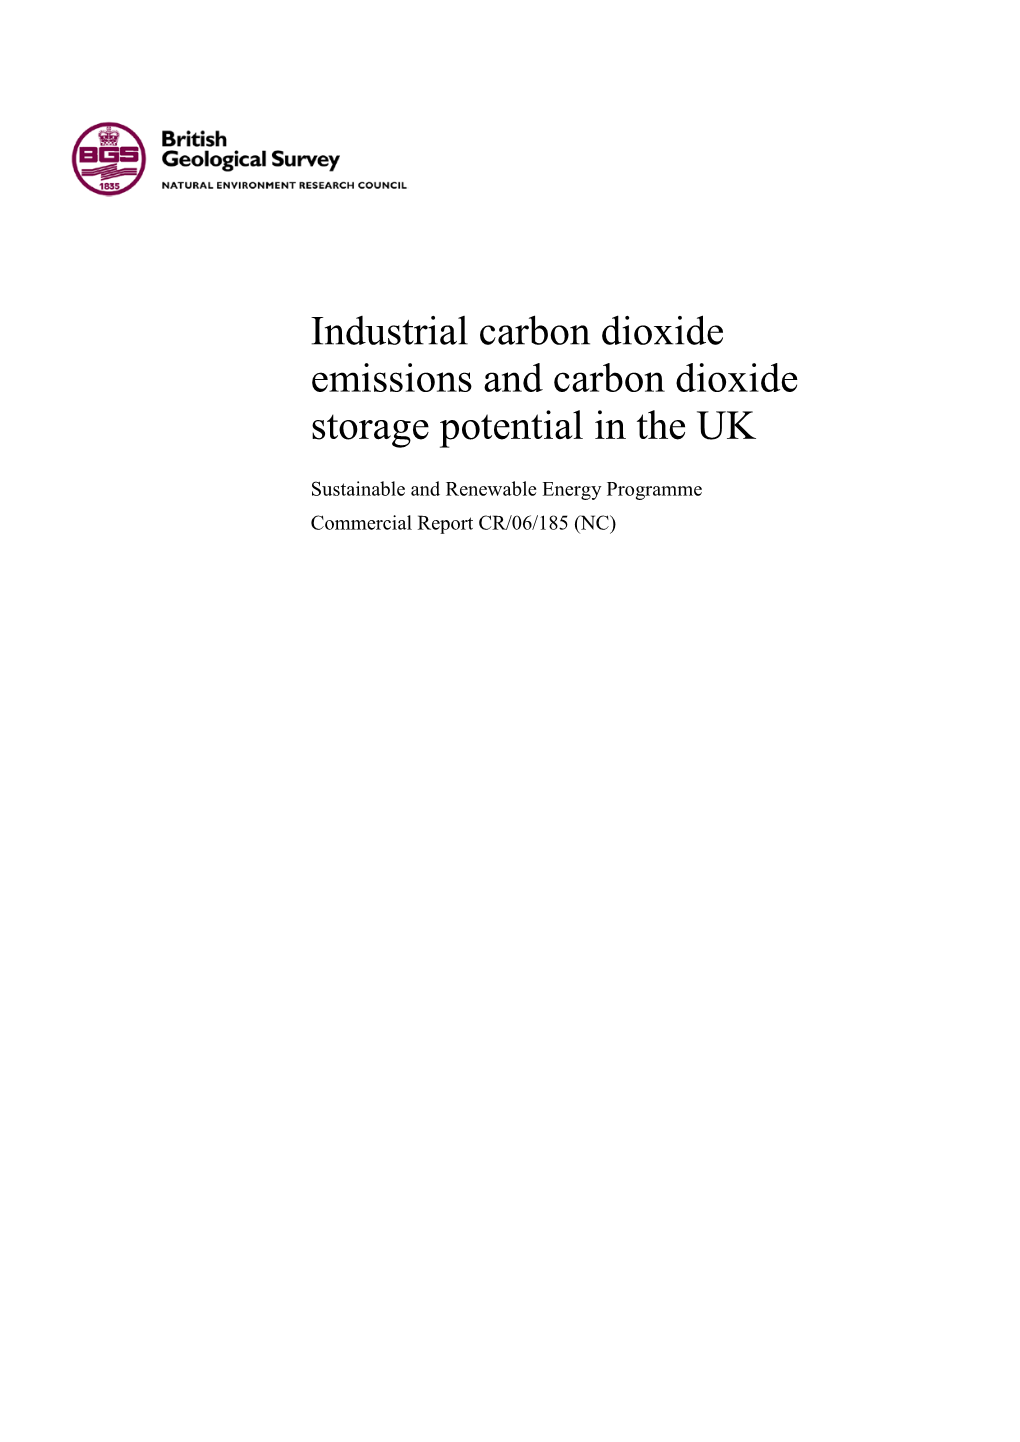 Industrial Carbon Dioxide Emissions and Carbon Dioxide Storage Potential in the UK